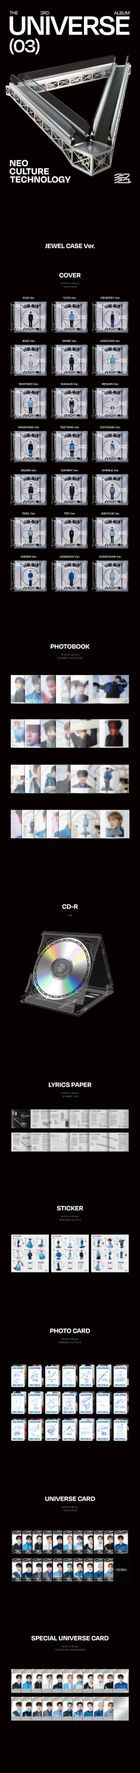 NCT Vol. 3 - Universe (Jewel Case Version) (Do Young Version)